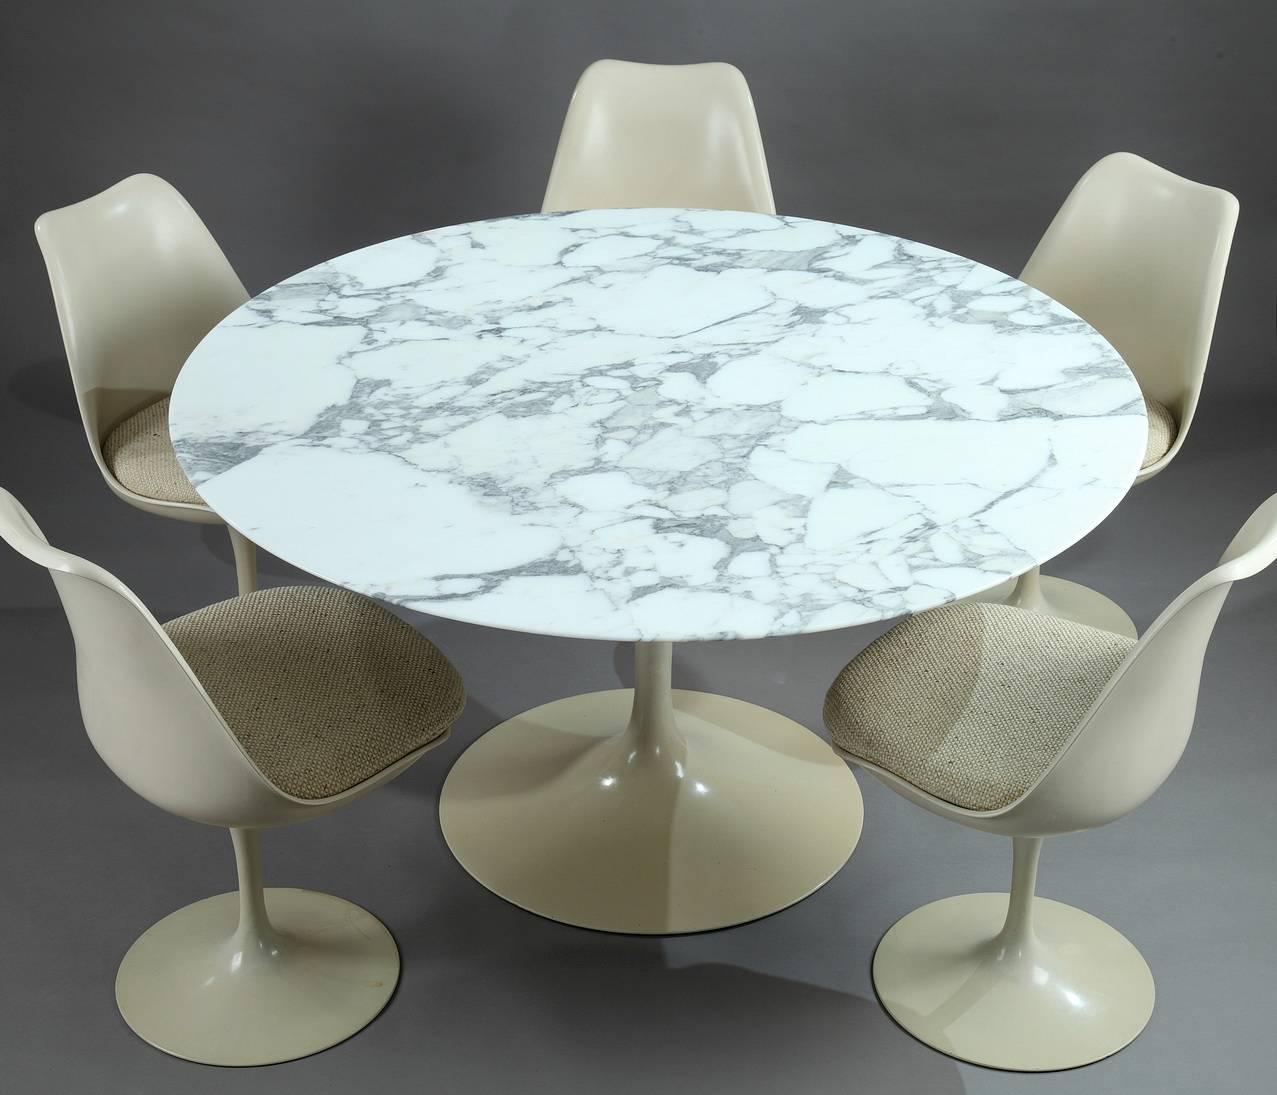 The Tulip dining table was designed by Eero Saarinen and was published by Knoll International. The upper part is a circular white arabescato marble. It is resting on a beige lacquered leg which is wider and circular at the bottom.

Set of five